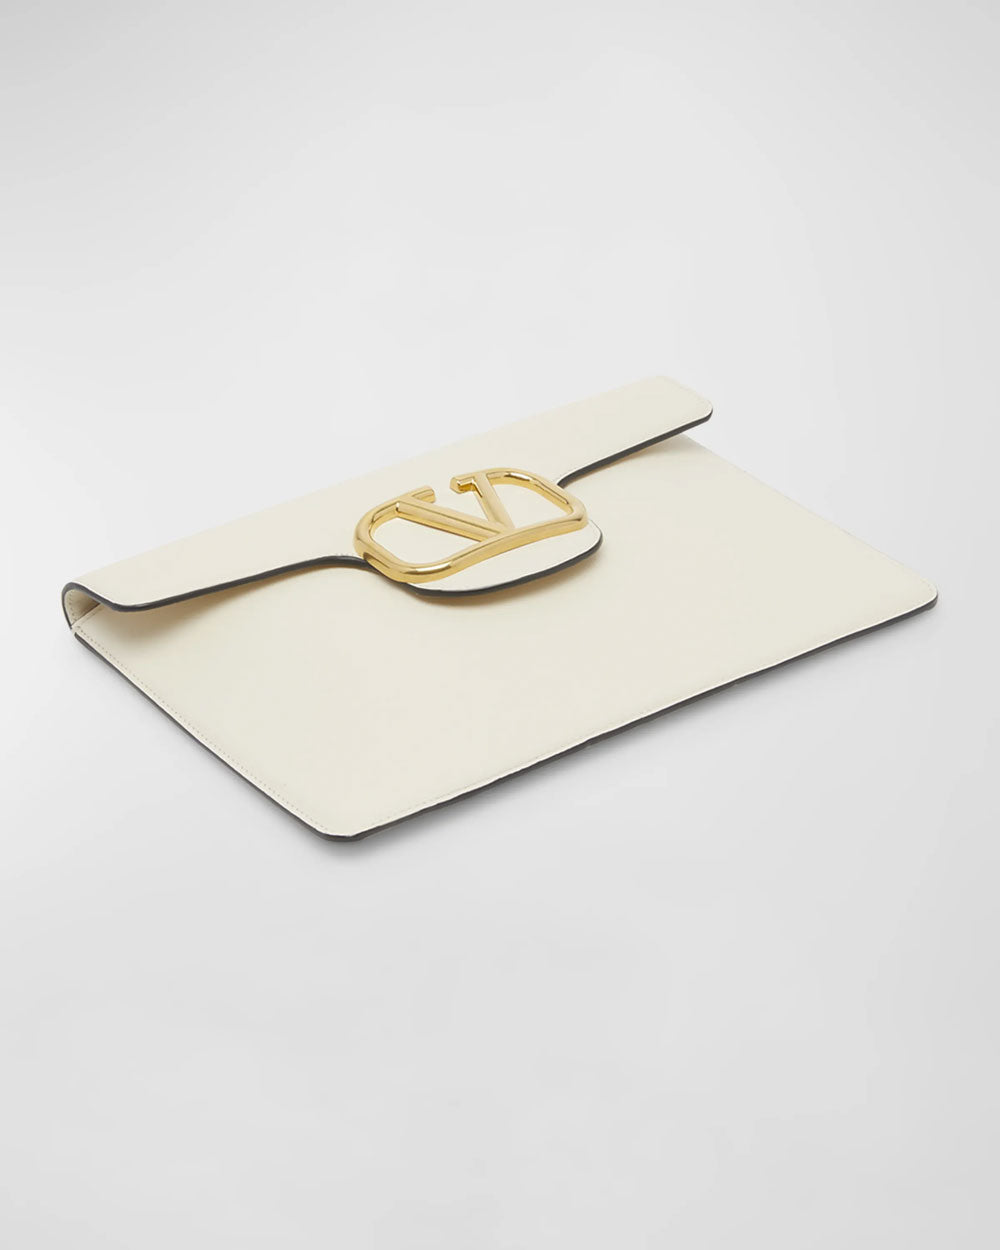 Loco VLogo Flap Leather Clutch in Ivory